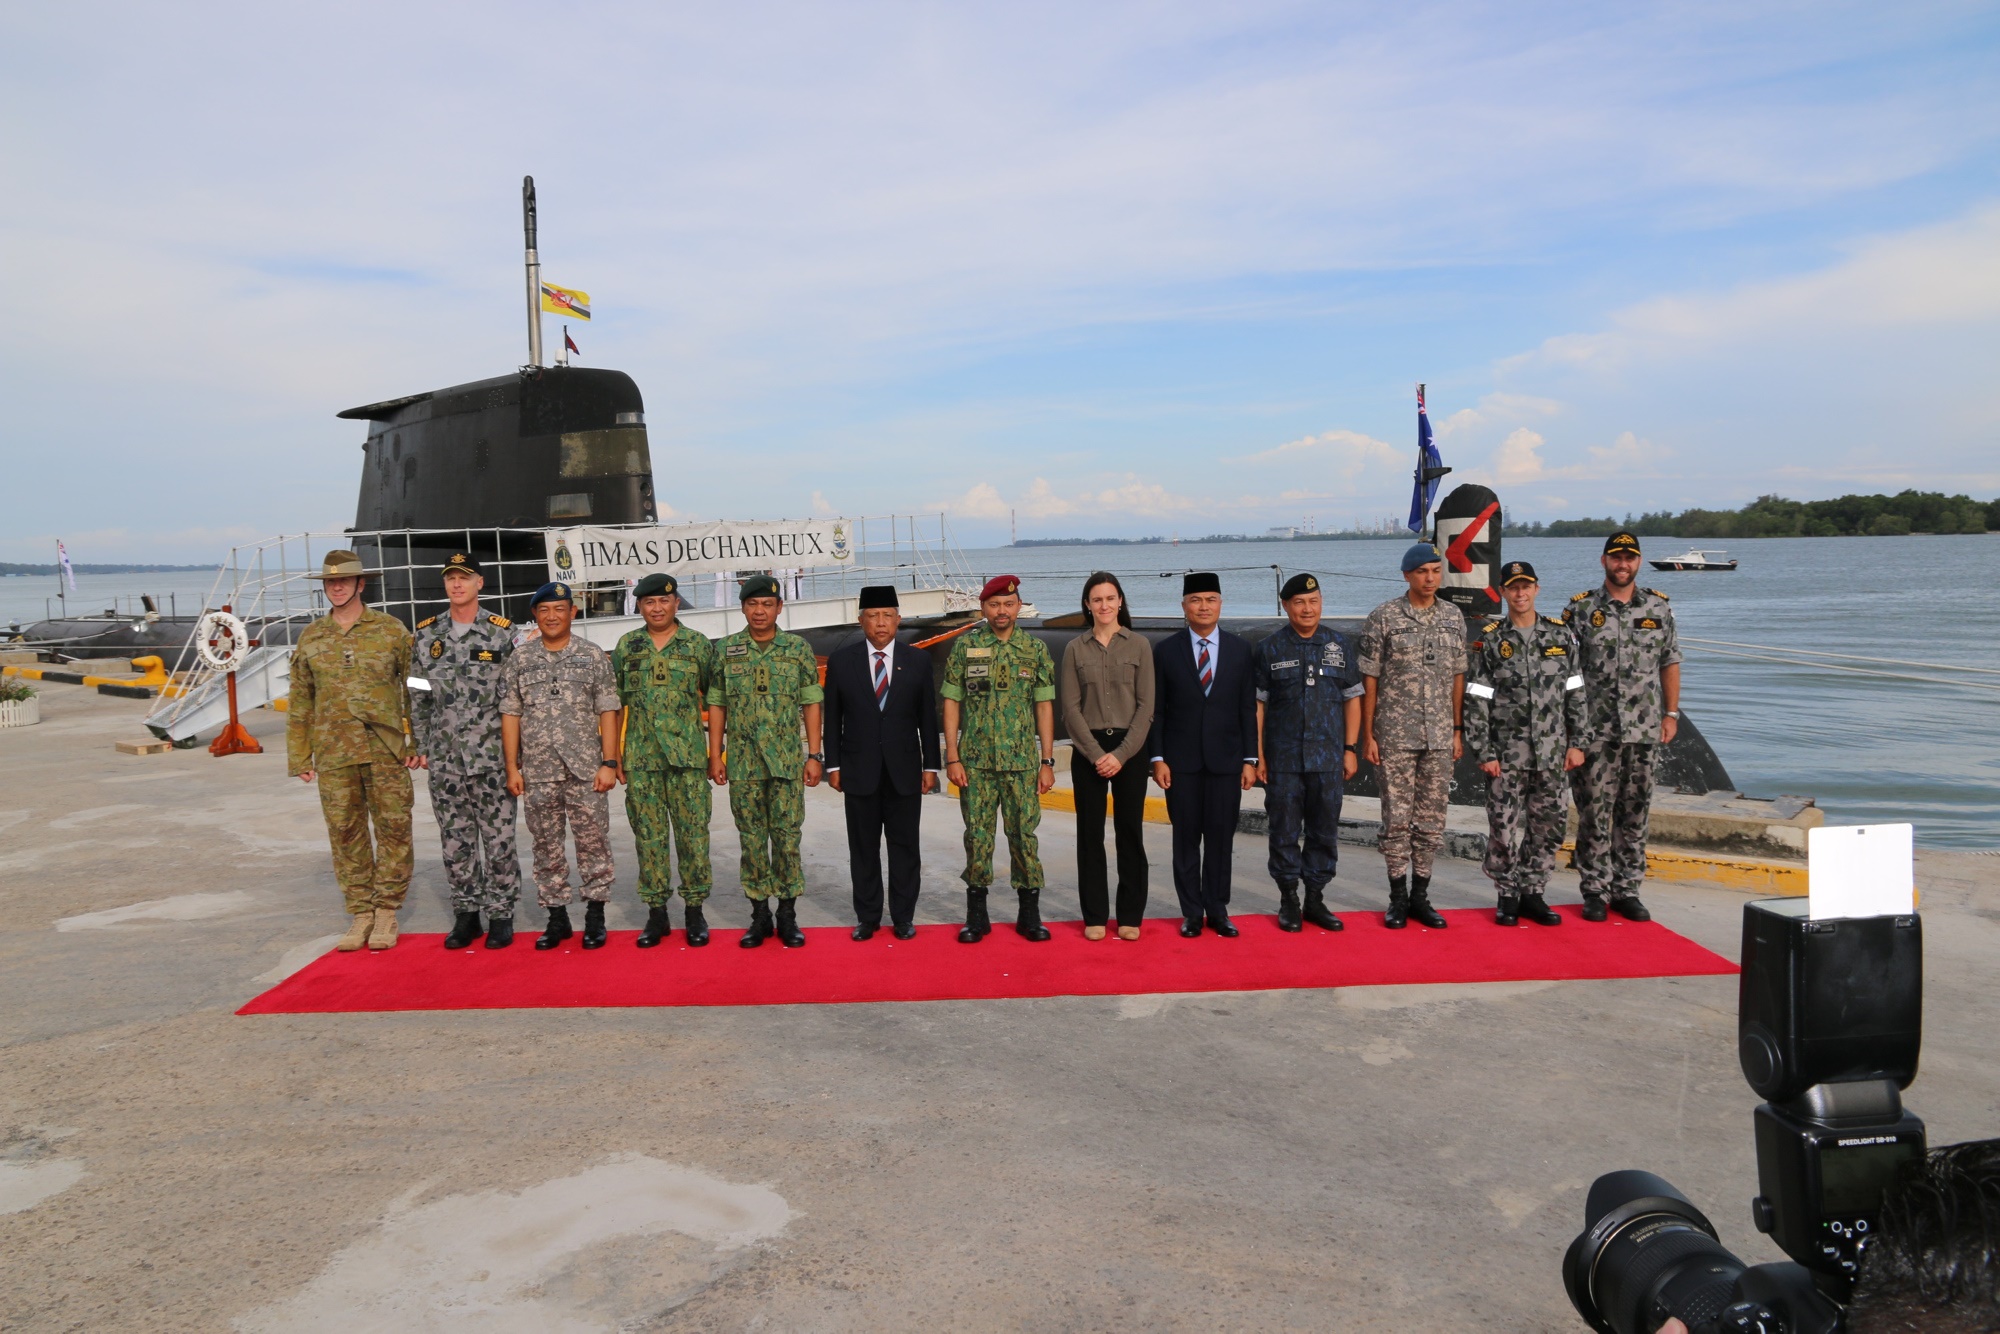 Inaugural visit to Brunei by HMAS Dechaineux